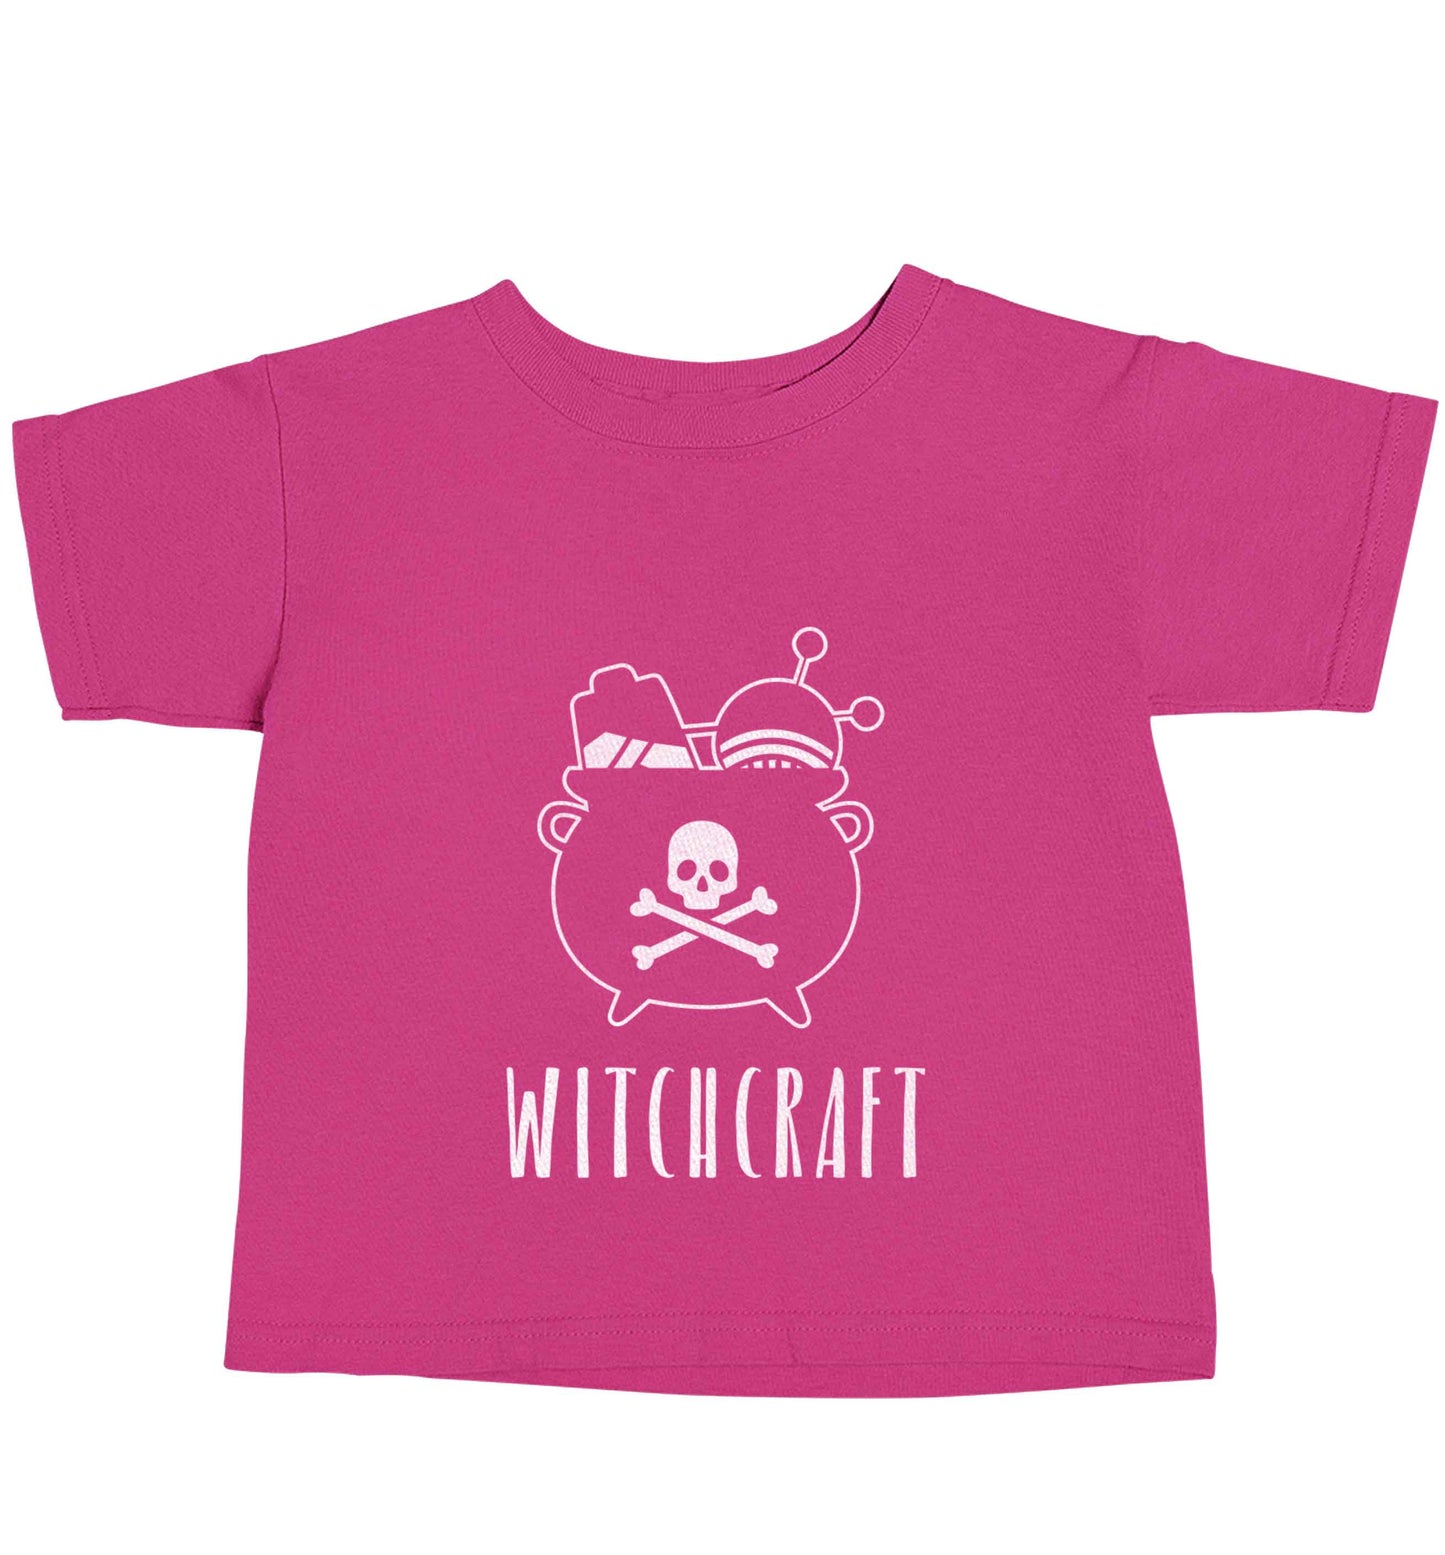 Witchcraft pink baby toddler Tshirt 2 Years